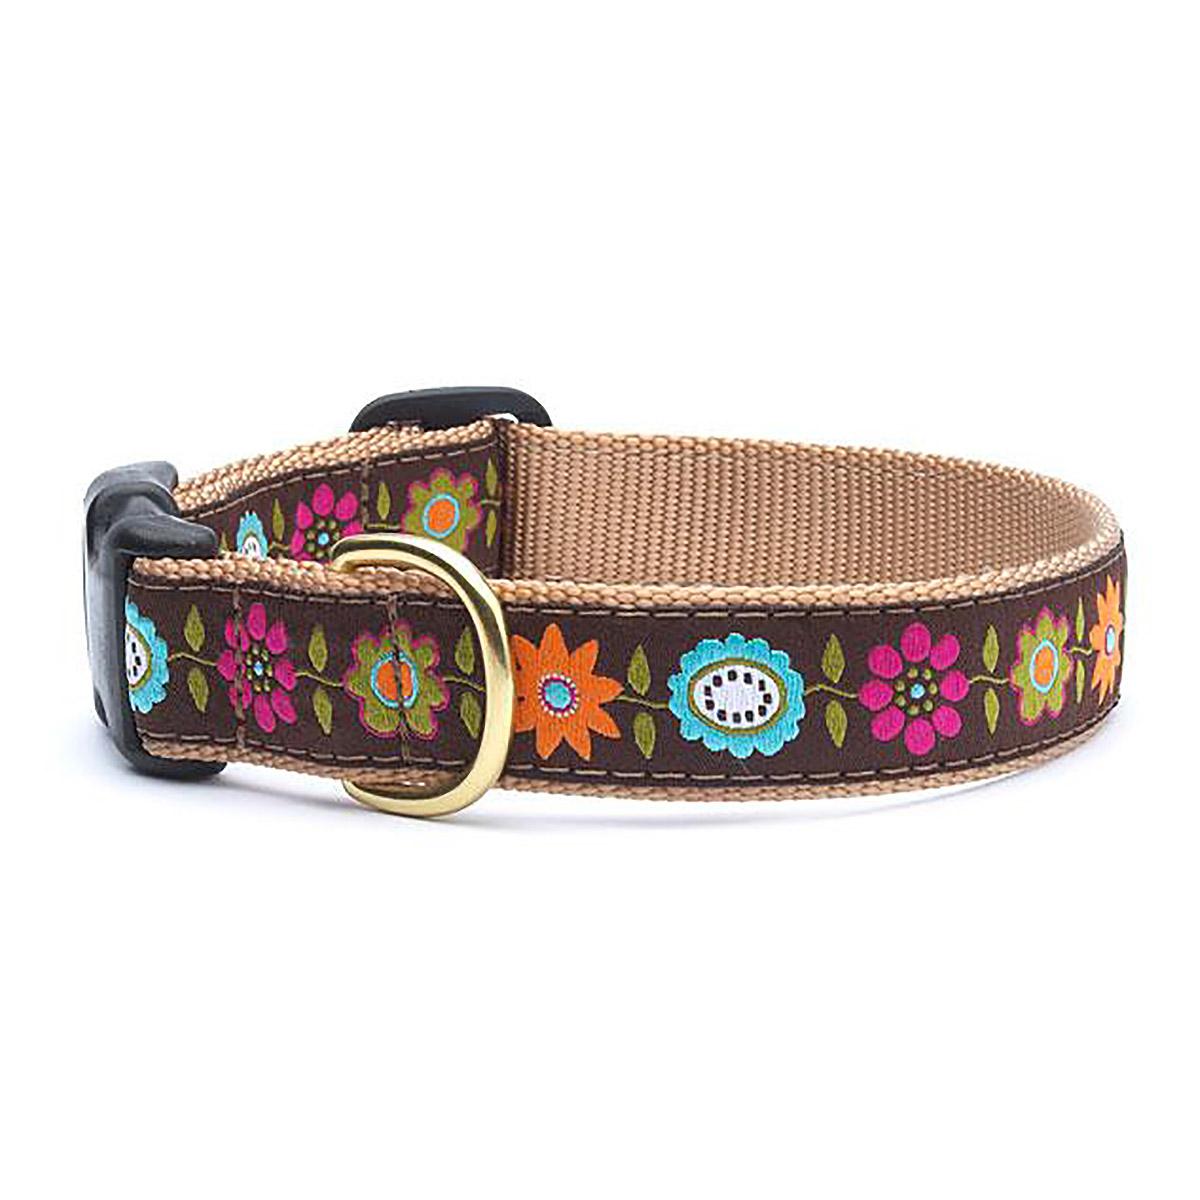 Bella Floral Dog Collar by Up Country